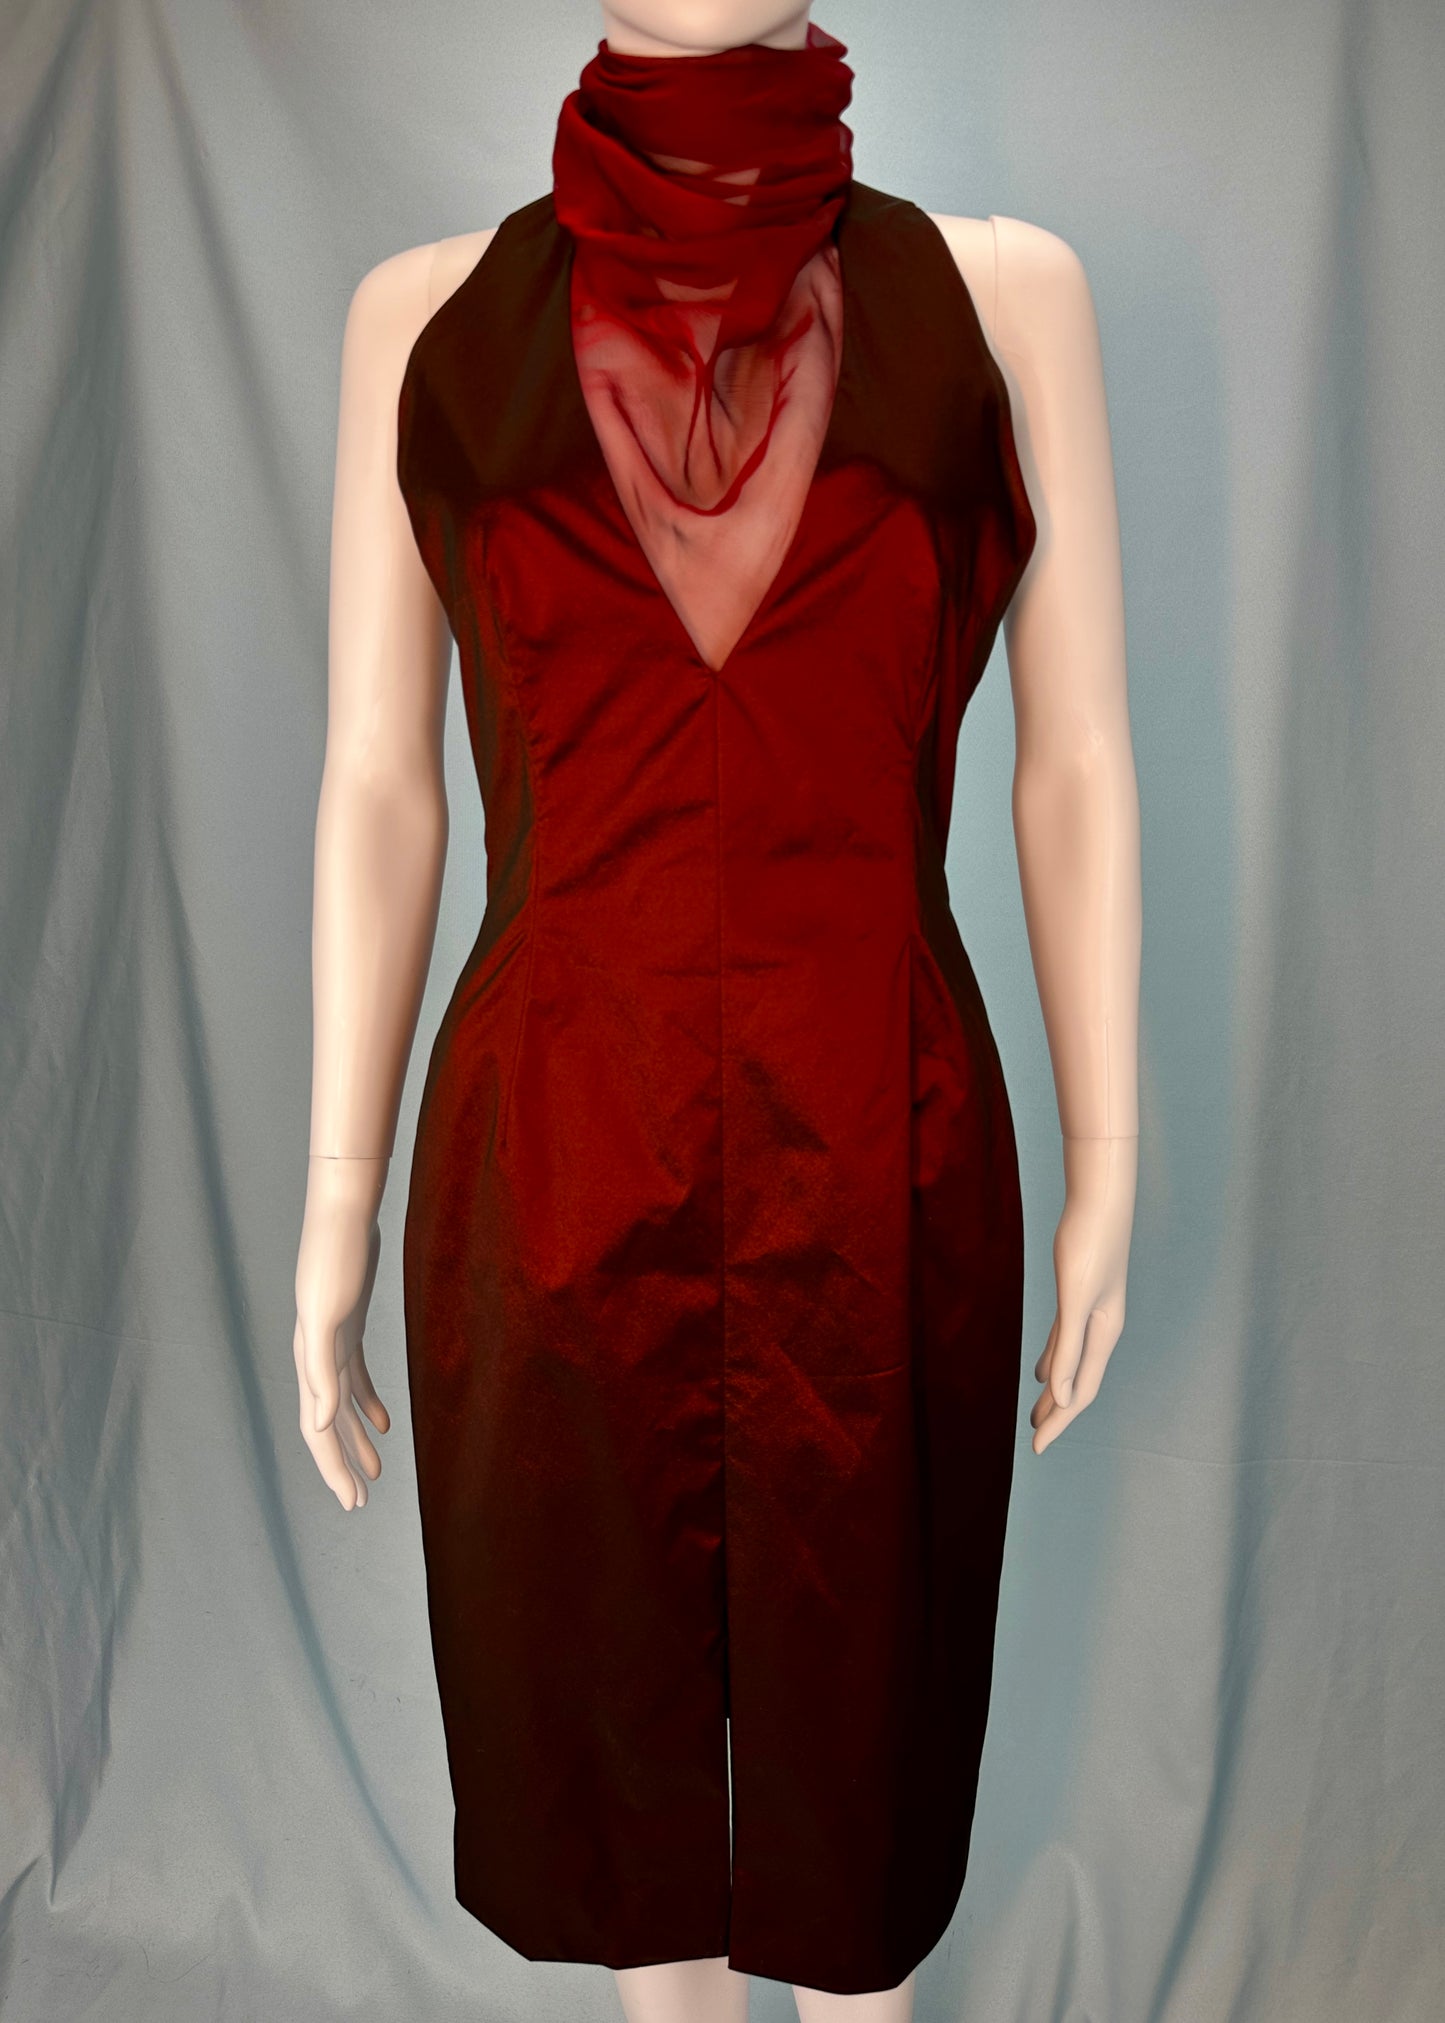 Givenchy Couture by Alexander McQueen Fall 1998 Red Chiffon Mock Neck Dress